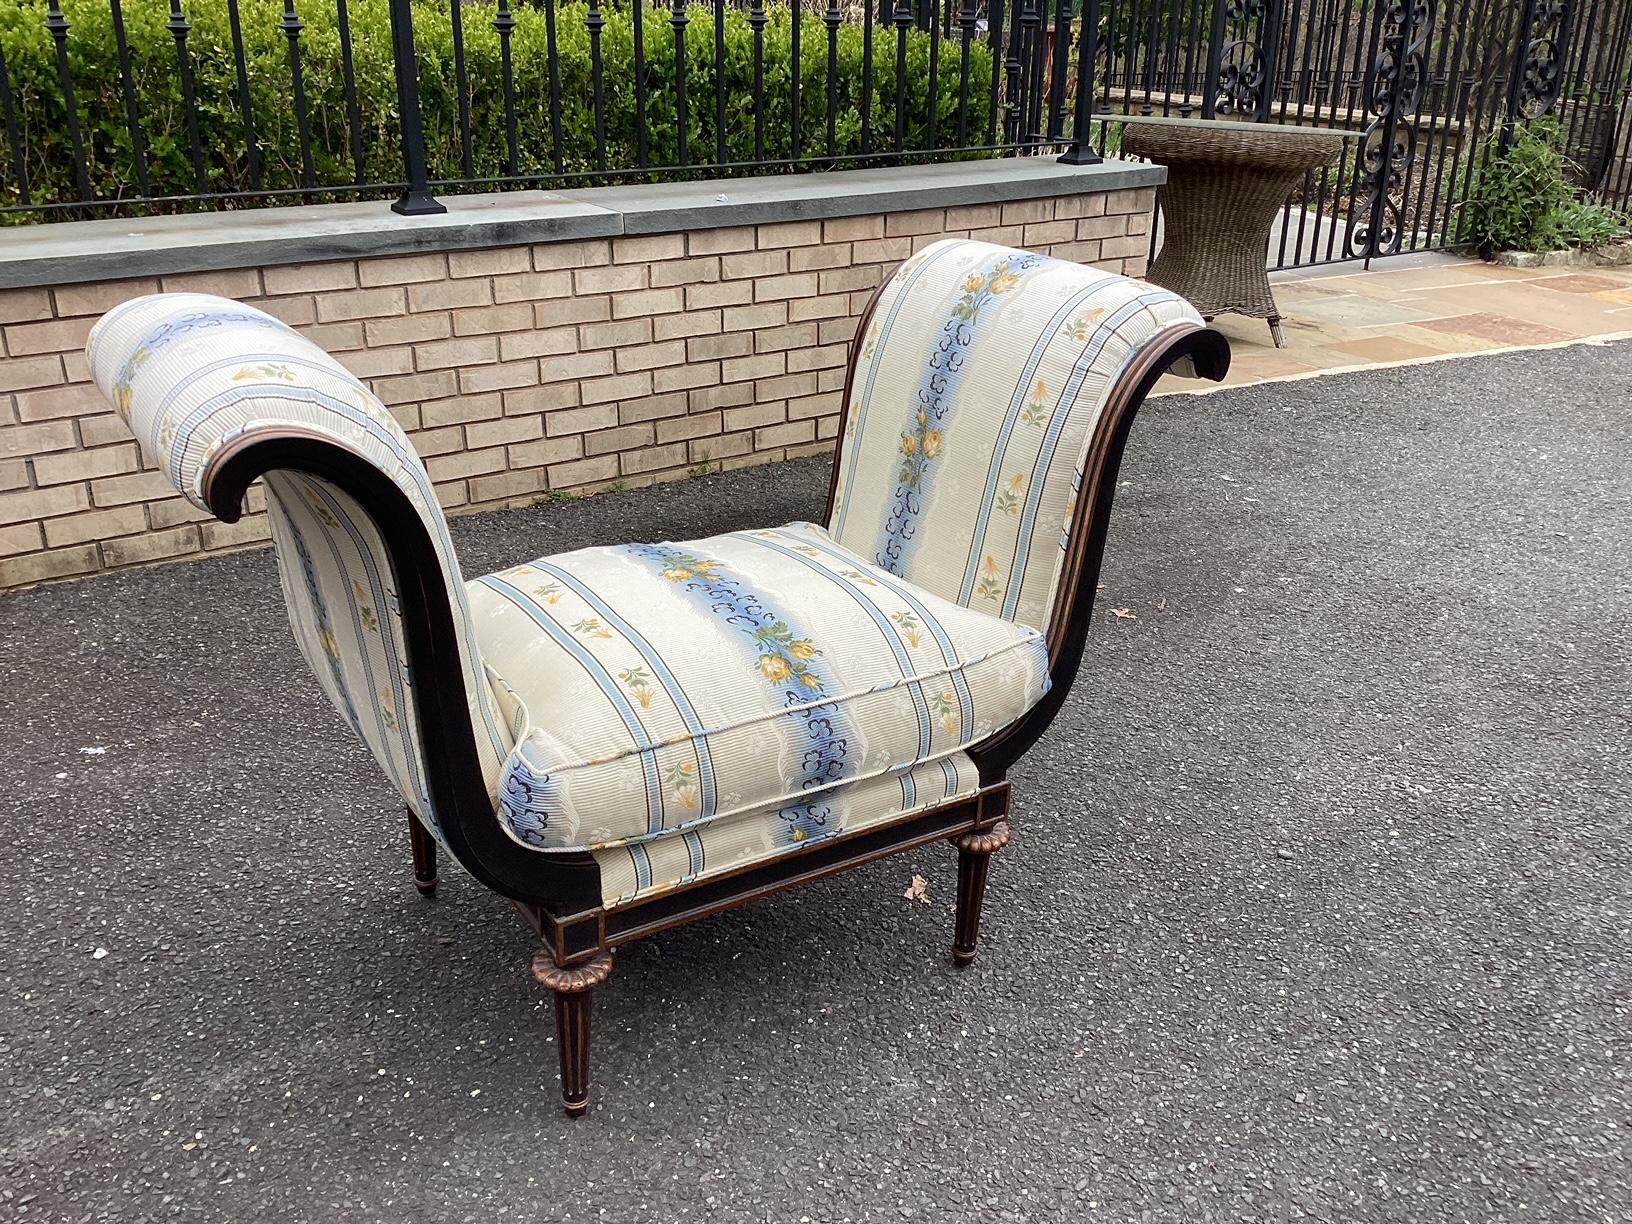 Exquisite Nancy Corzine bench having black painted legs with gold accents and a stunning, rich white and blue silk stripe and floral upholstery. The sides are stylishly curved and tall.